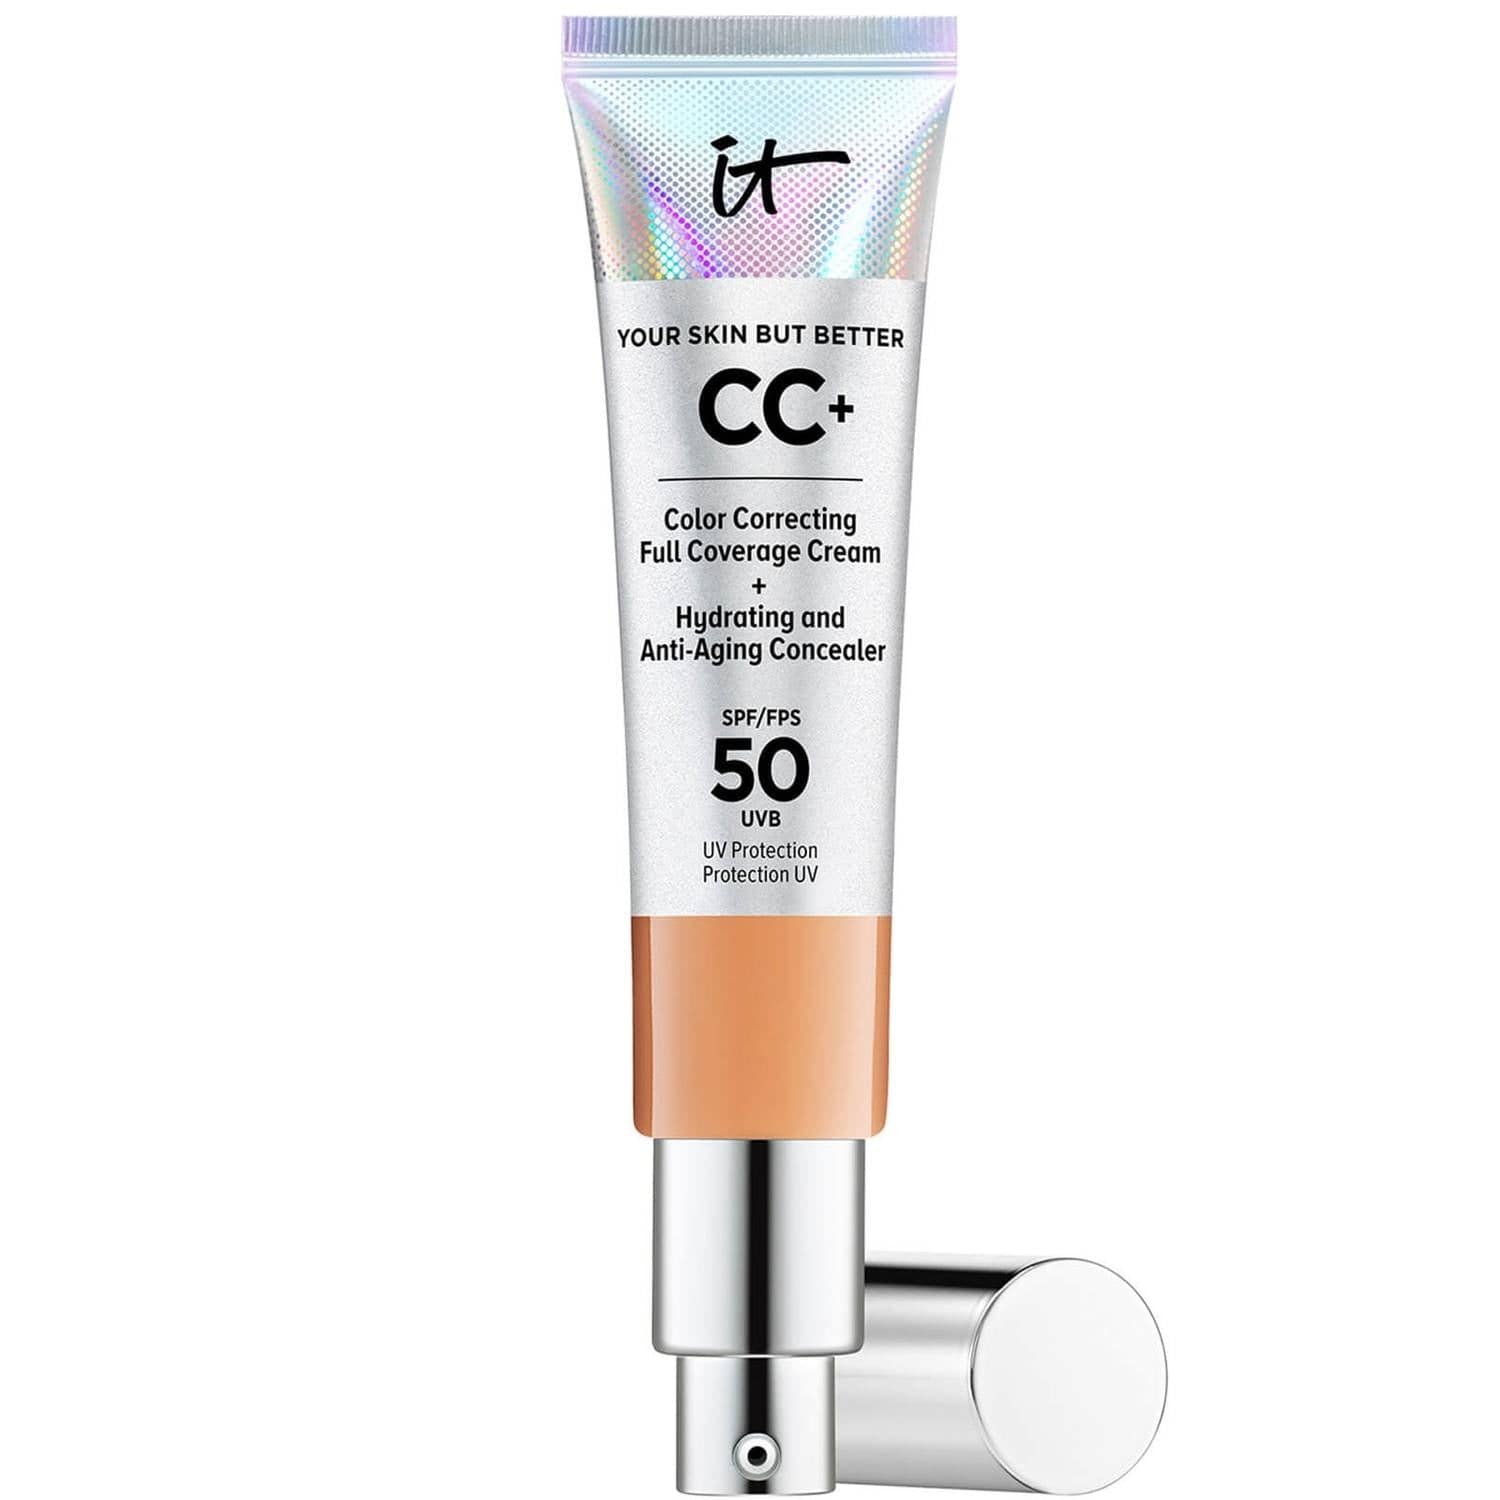 IT COSMETICS Beauty IT Cosmetics Your Skin But Better CC+ Cream with SPF50 32ml - Tan